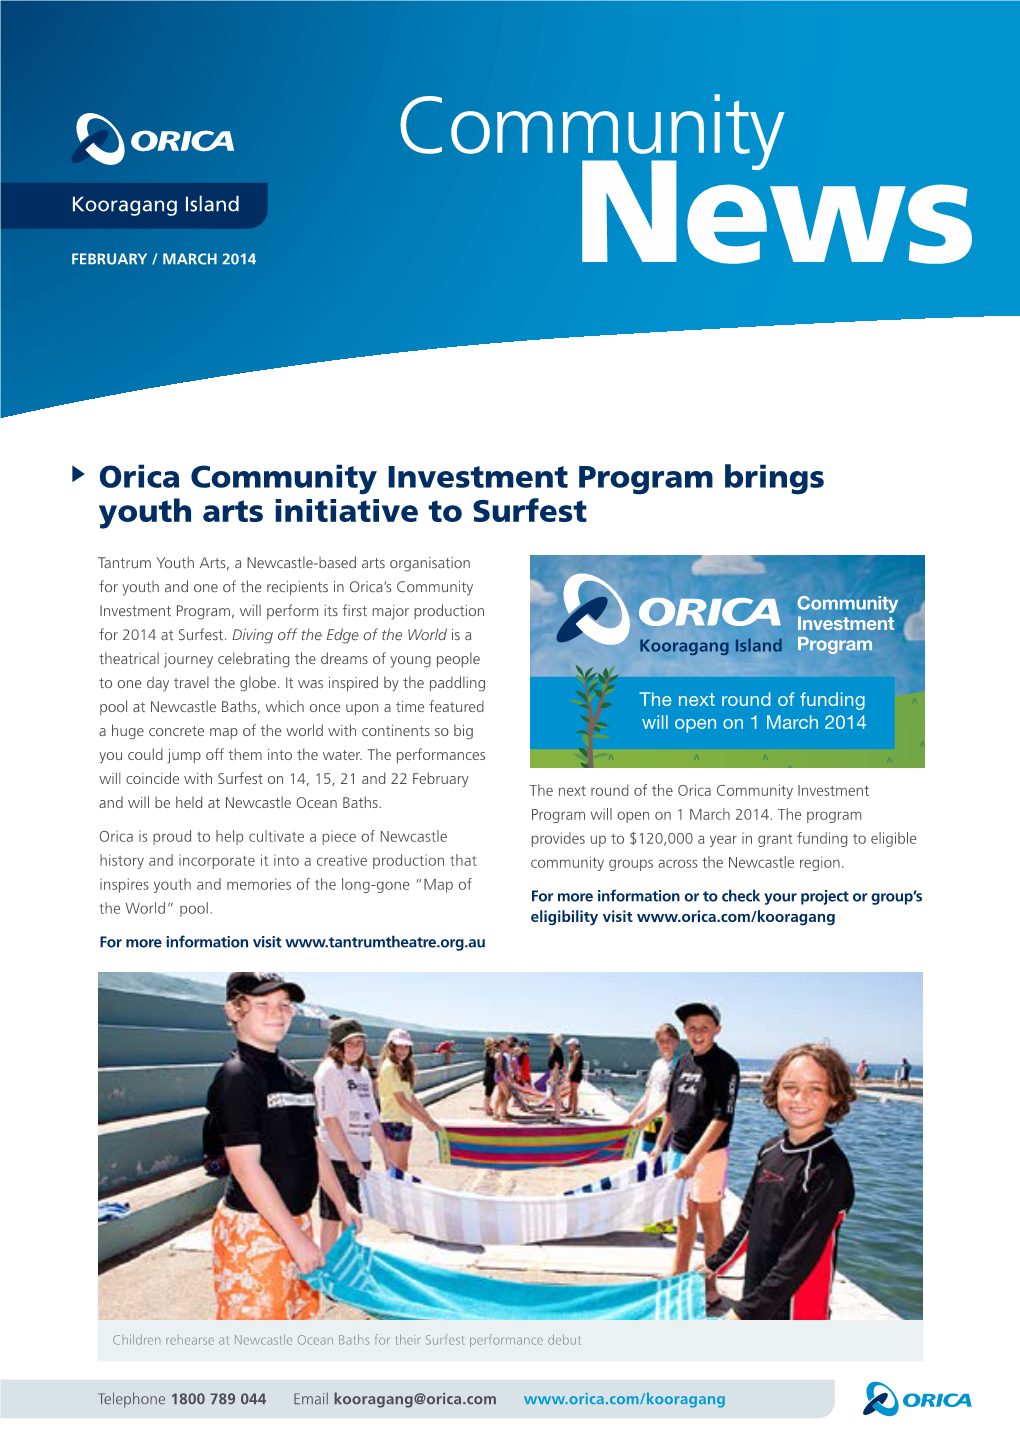 Orica Community Investment Program Brings Youth Arts Initiative to Surfest